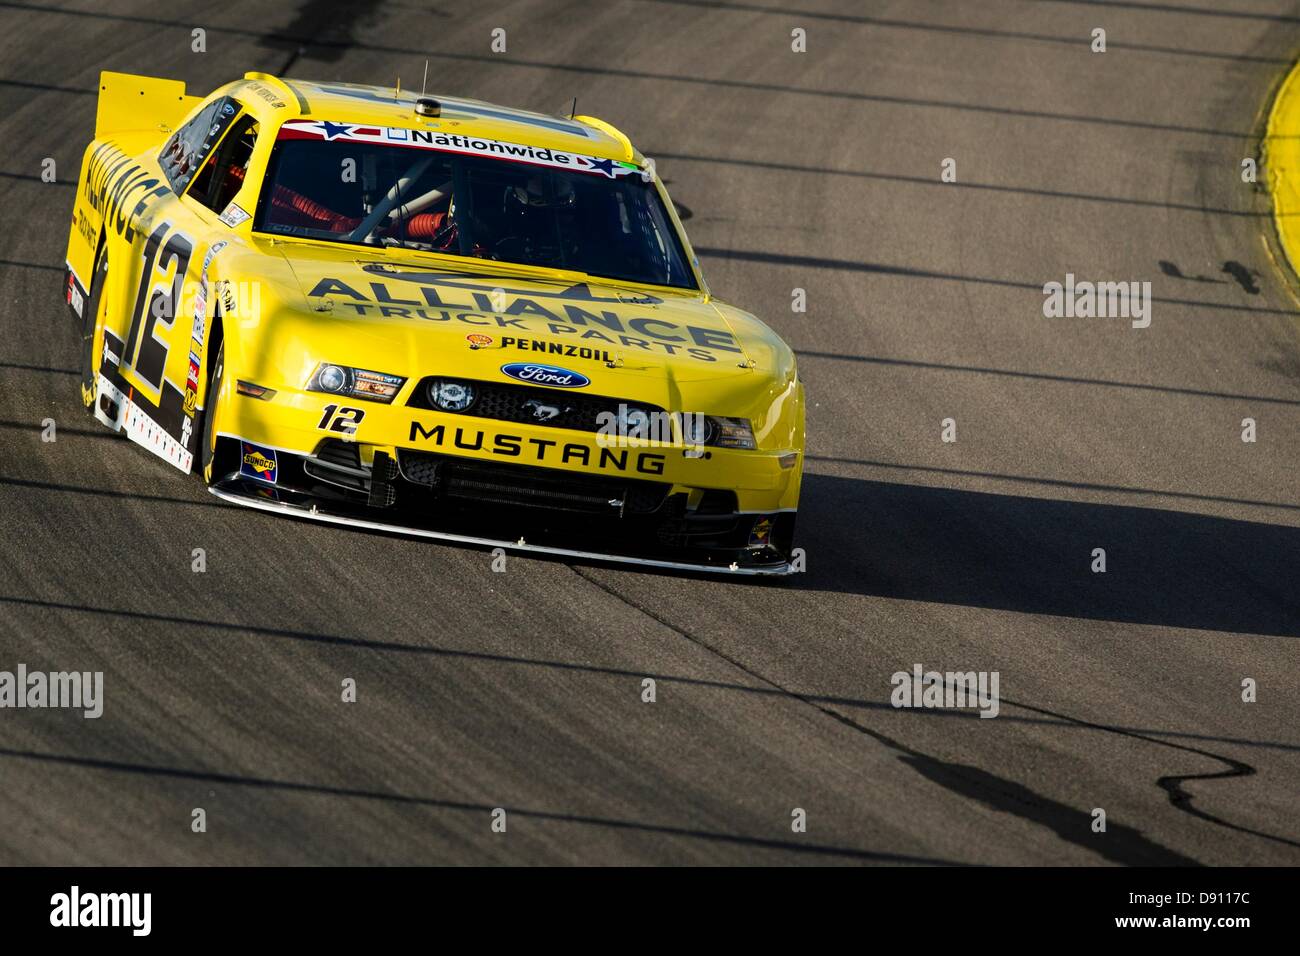 Newton, IA, USA. June 7th, 2013. Sam Hornish Jr. (12) takes to the track during practice for the Pioneer Hi-Bred 250 at the Iowa Speedway in Newton, IA. Credit:  Cal Sport Media/Alamy Live News Stock Photo